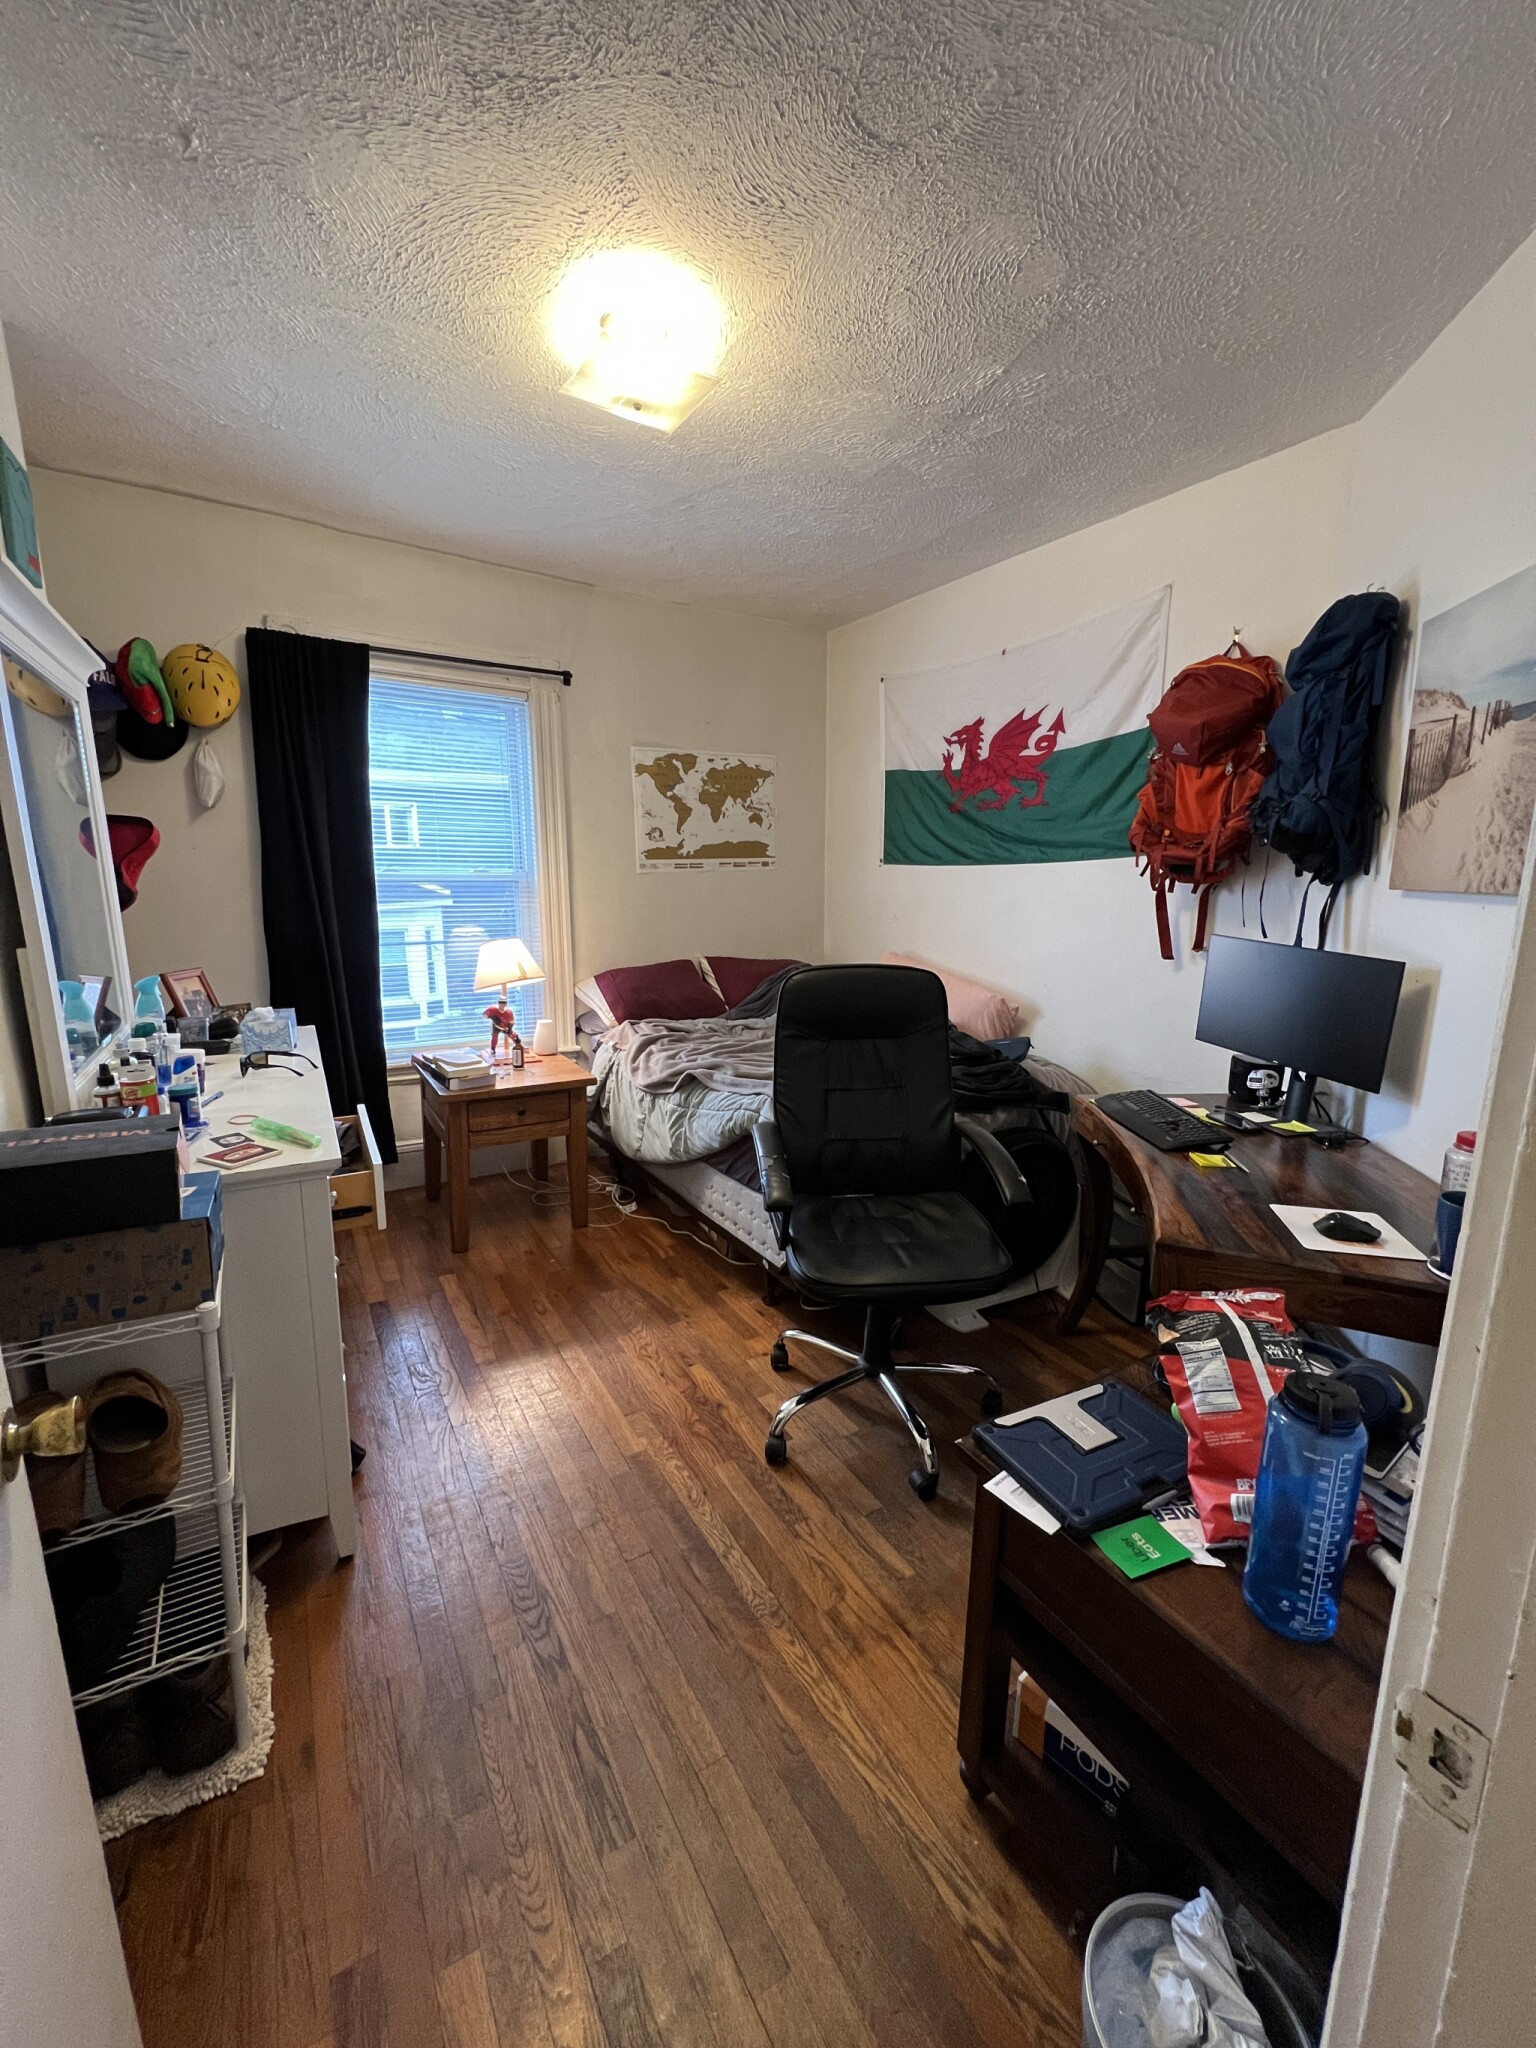 Photos of apartment on Albion St.,Somerville MA 02143